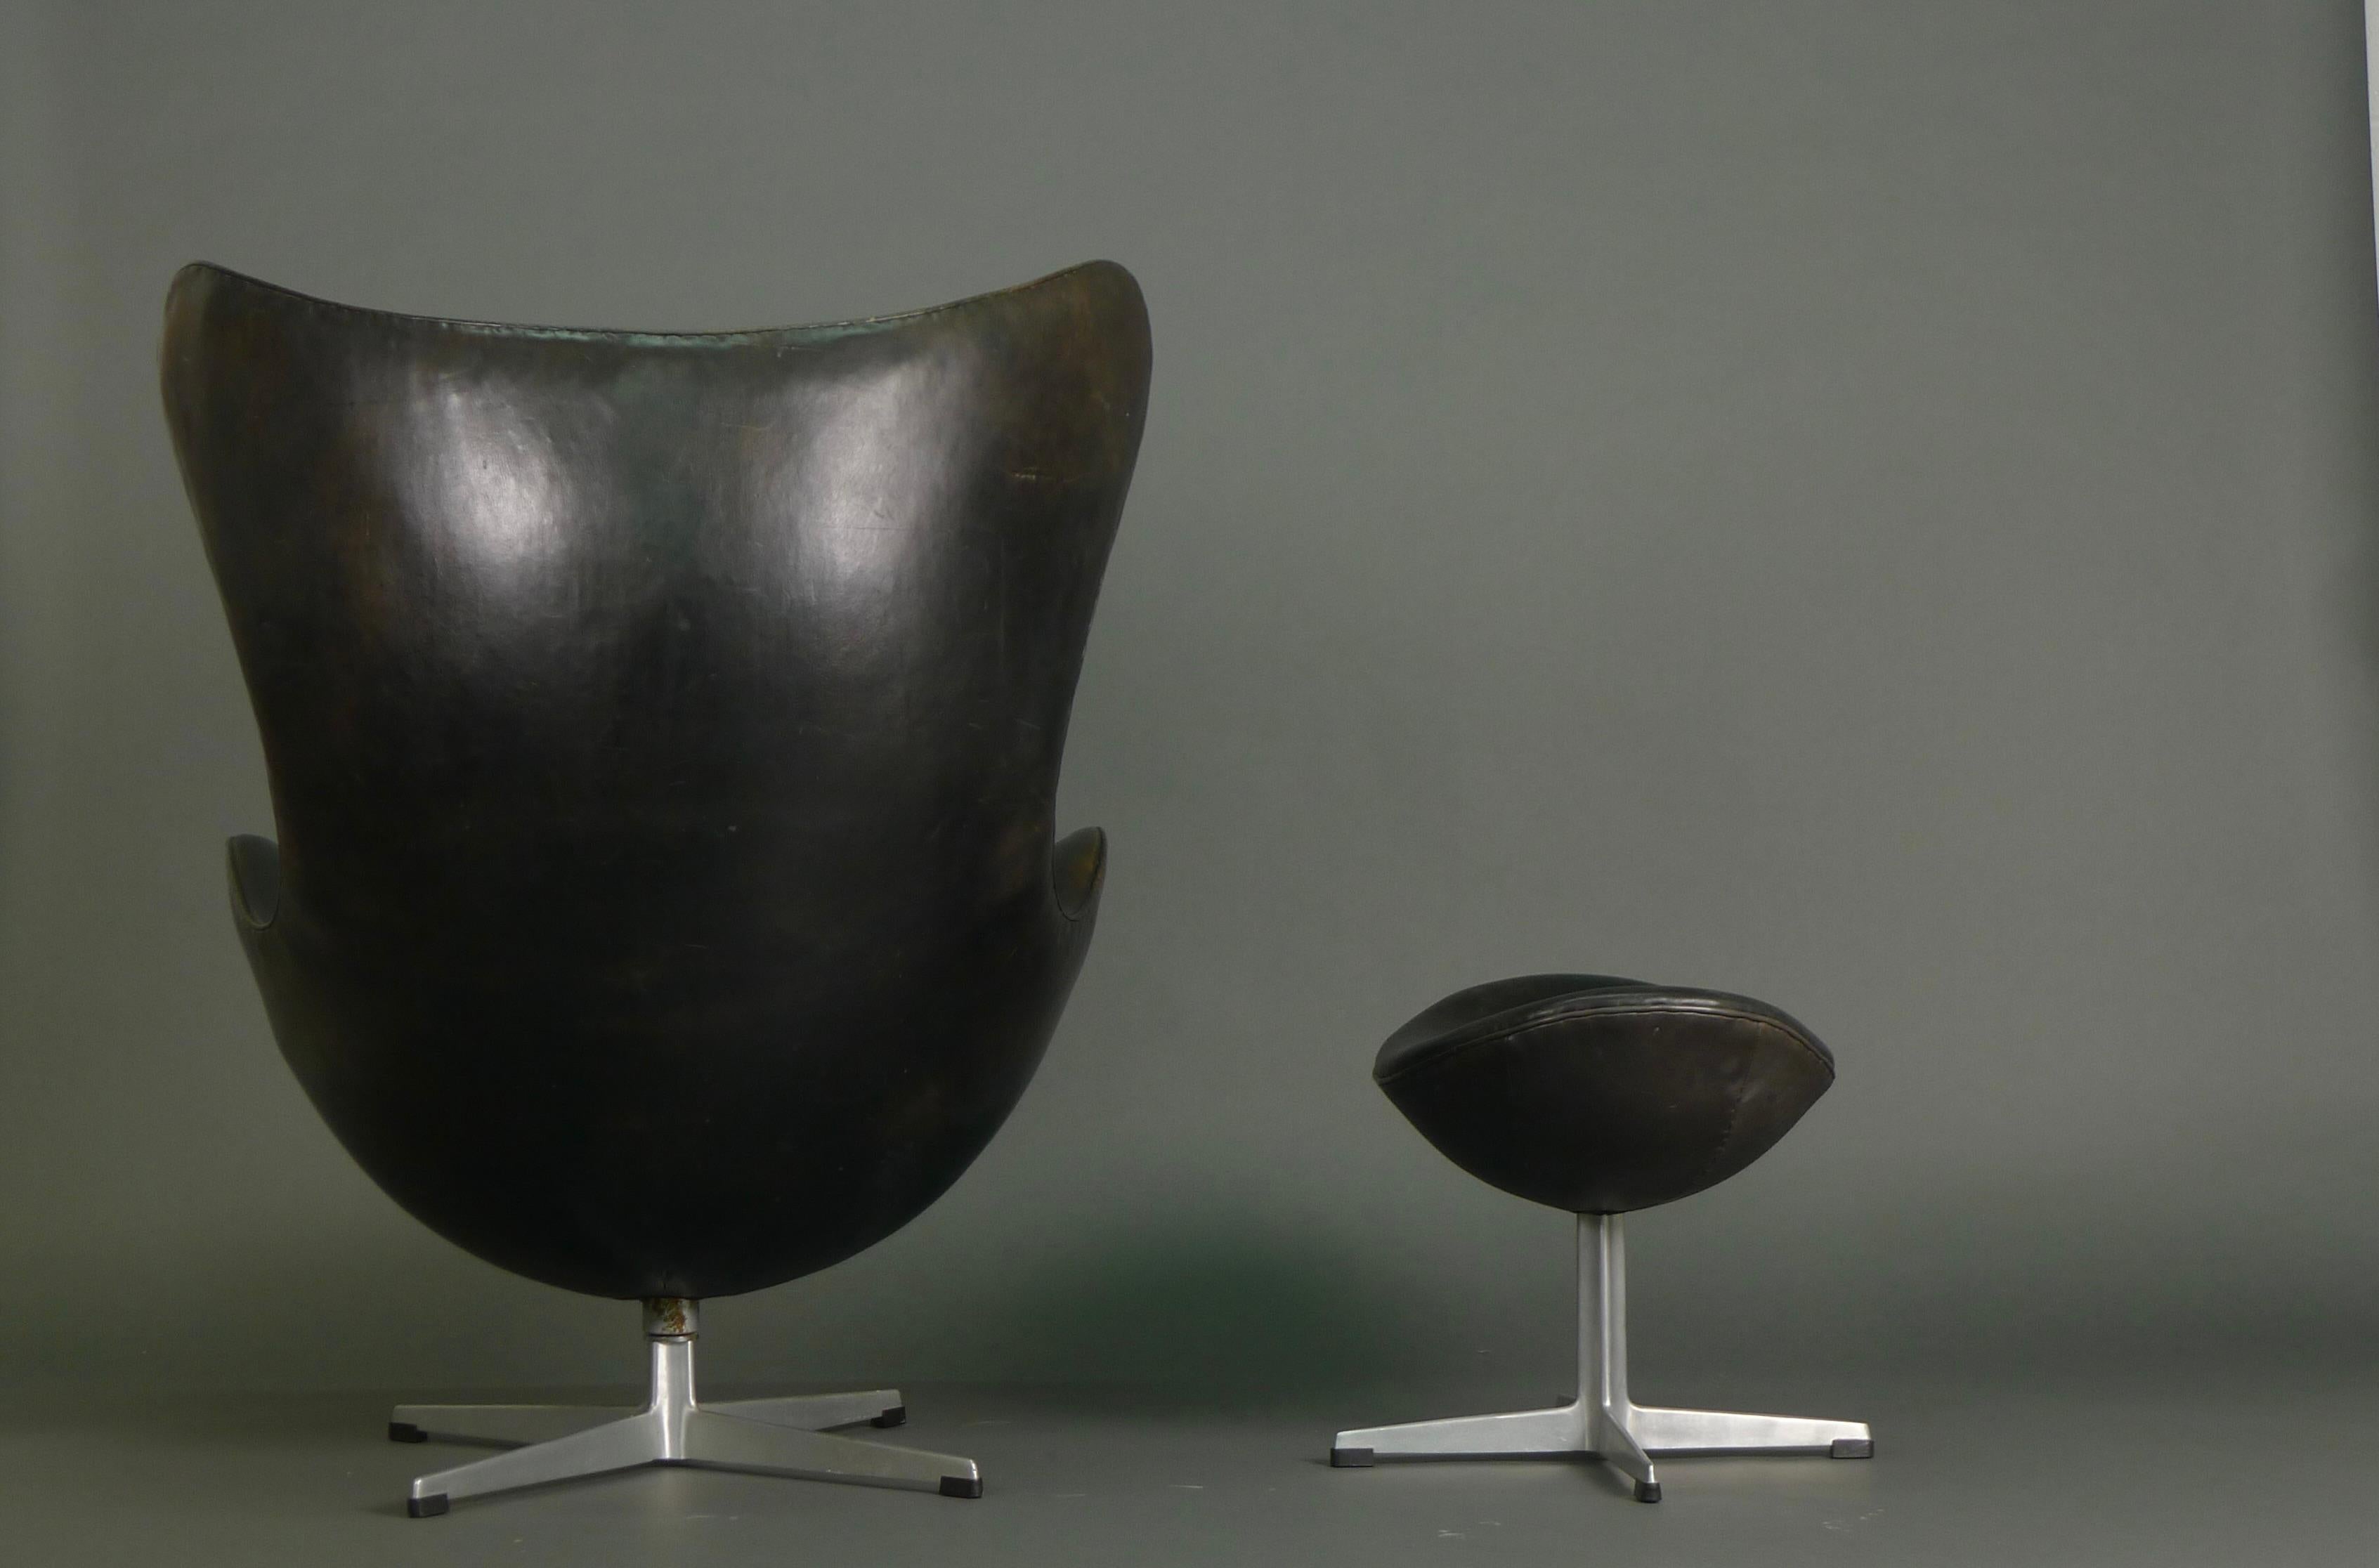 Danish Arne Jacobsen, Early Egg Chair and Ottoman, Original Black Leather Upholstery For Sale